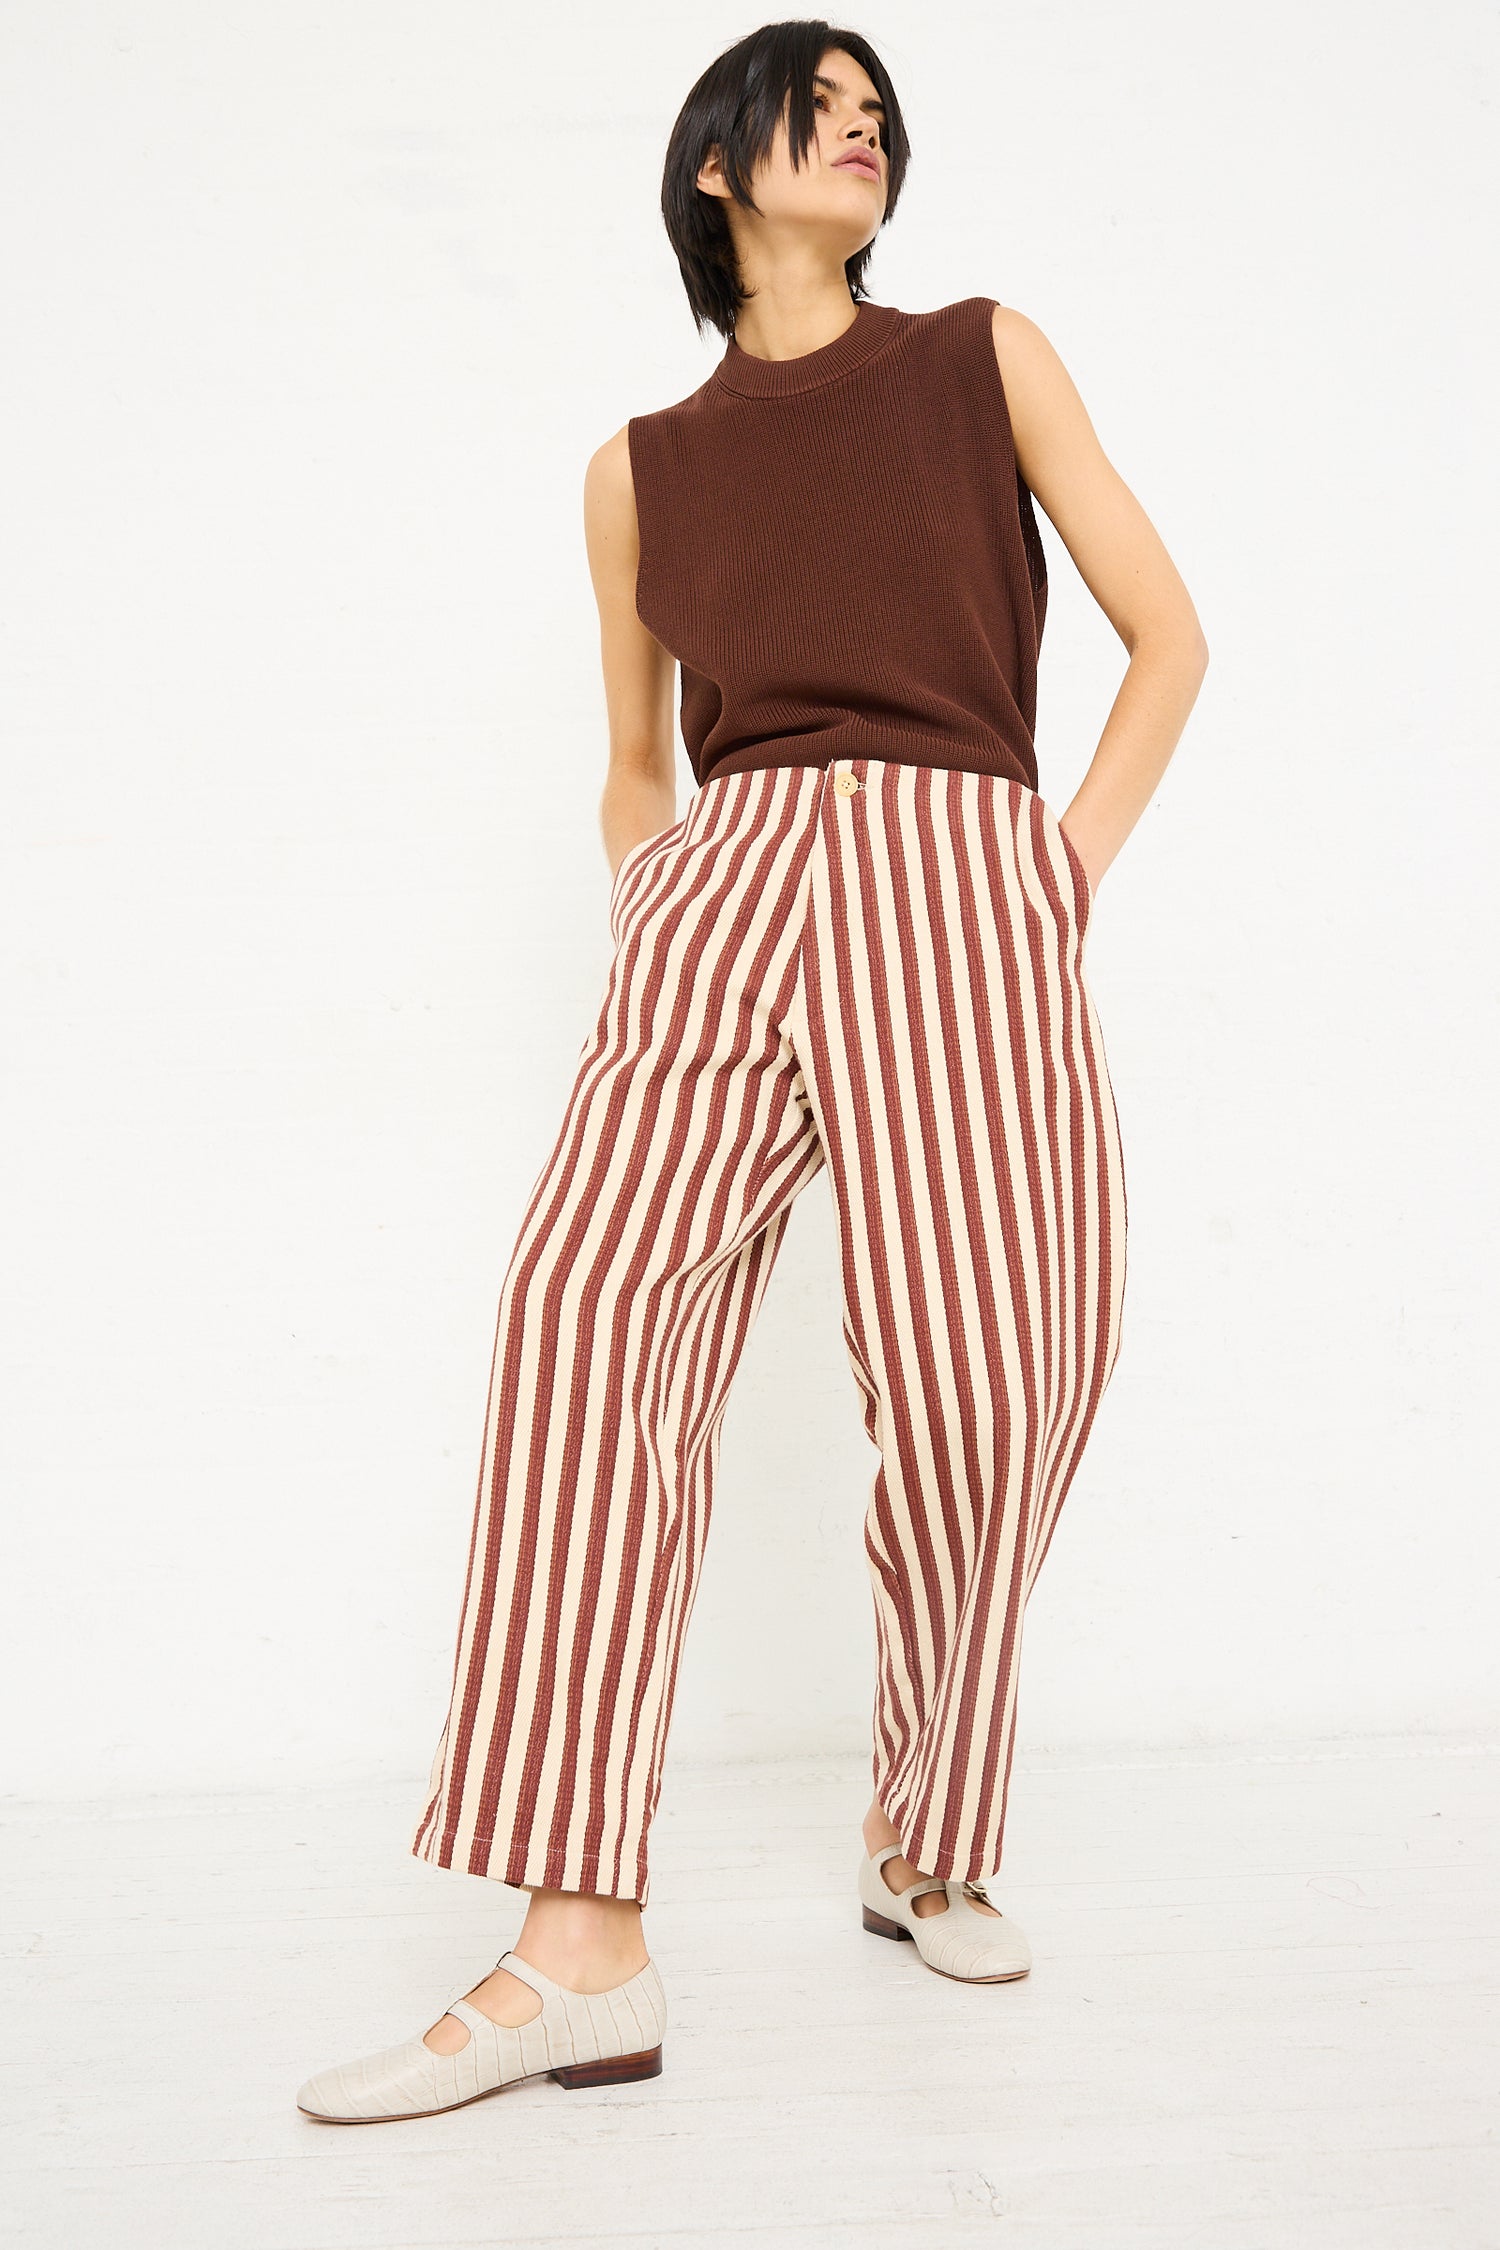 A woman stands in a casual pose wearing Caron Callahan's Dexter Pant in Auburn Stripe and sleeveless brown top, with her hand tucked into a pocket.